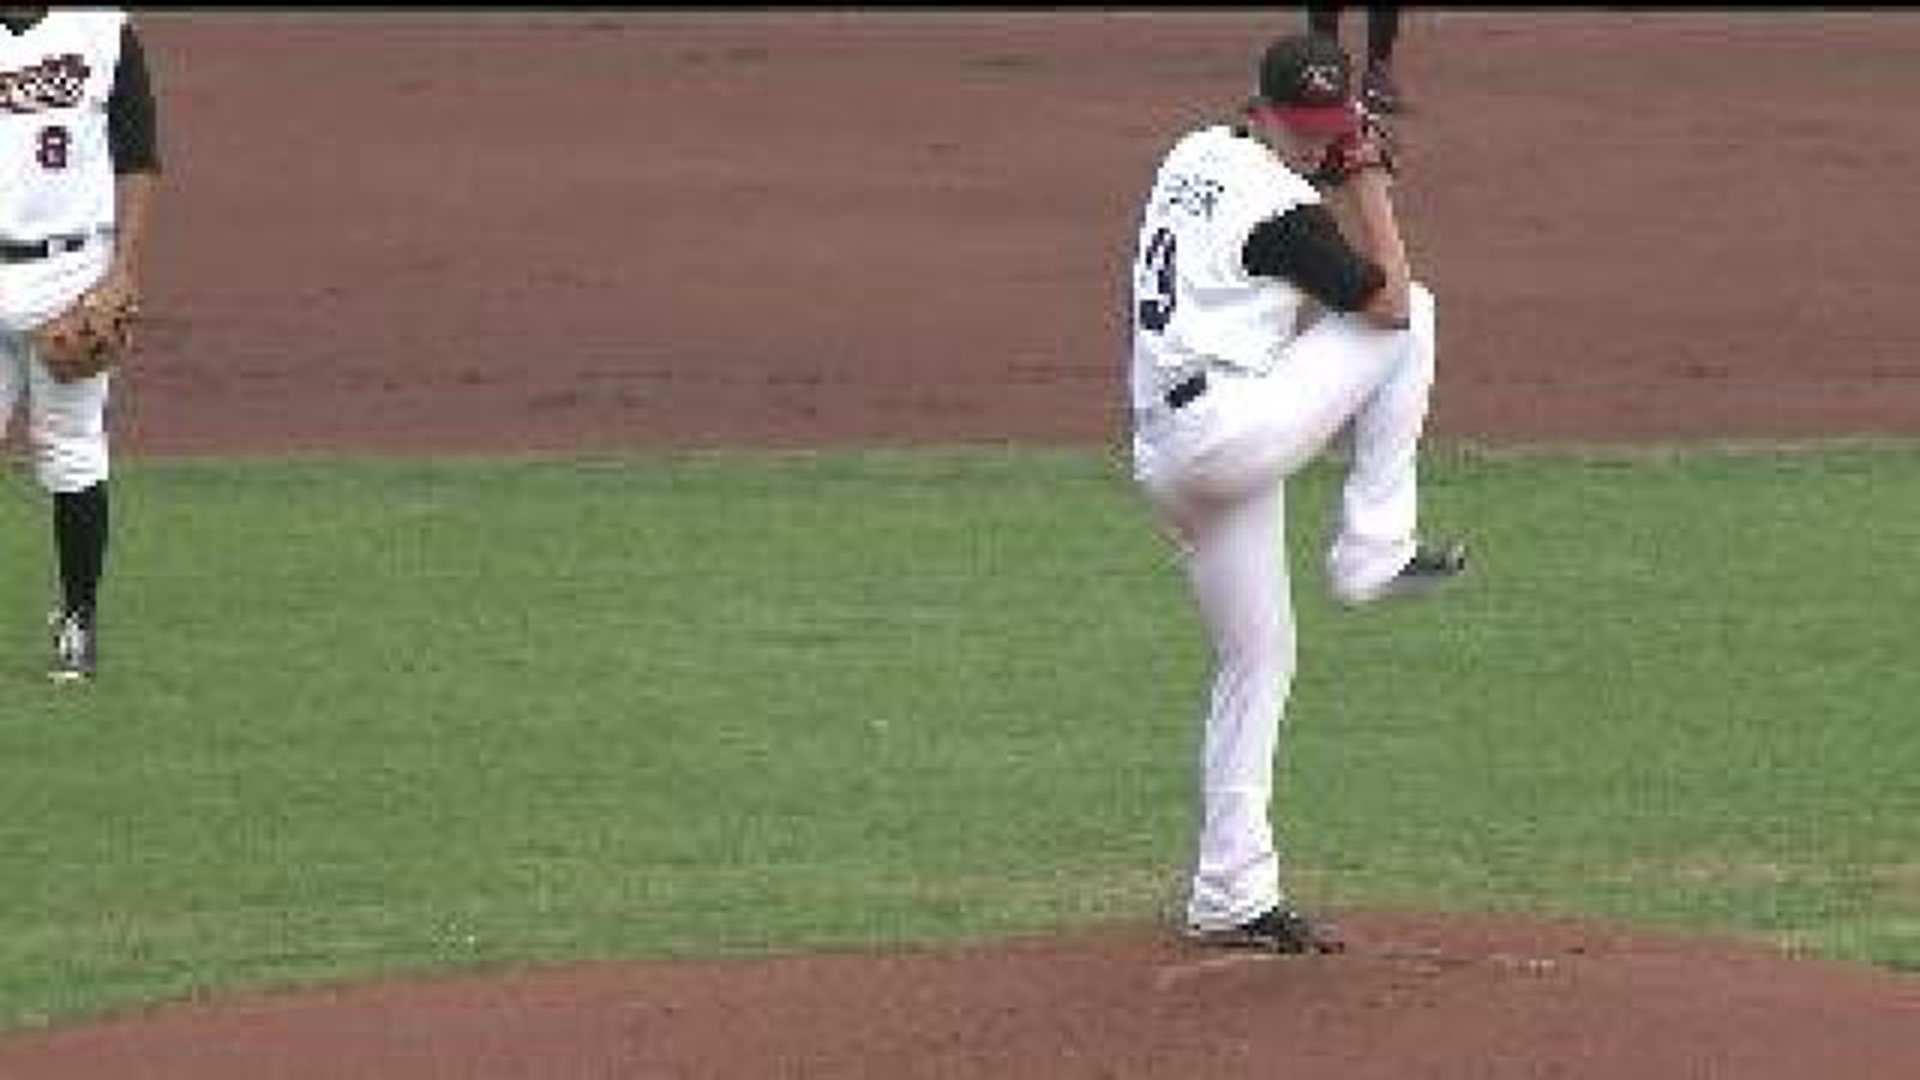 Bandits rely on pitching in post season